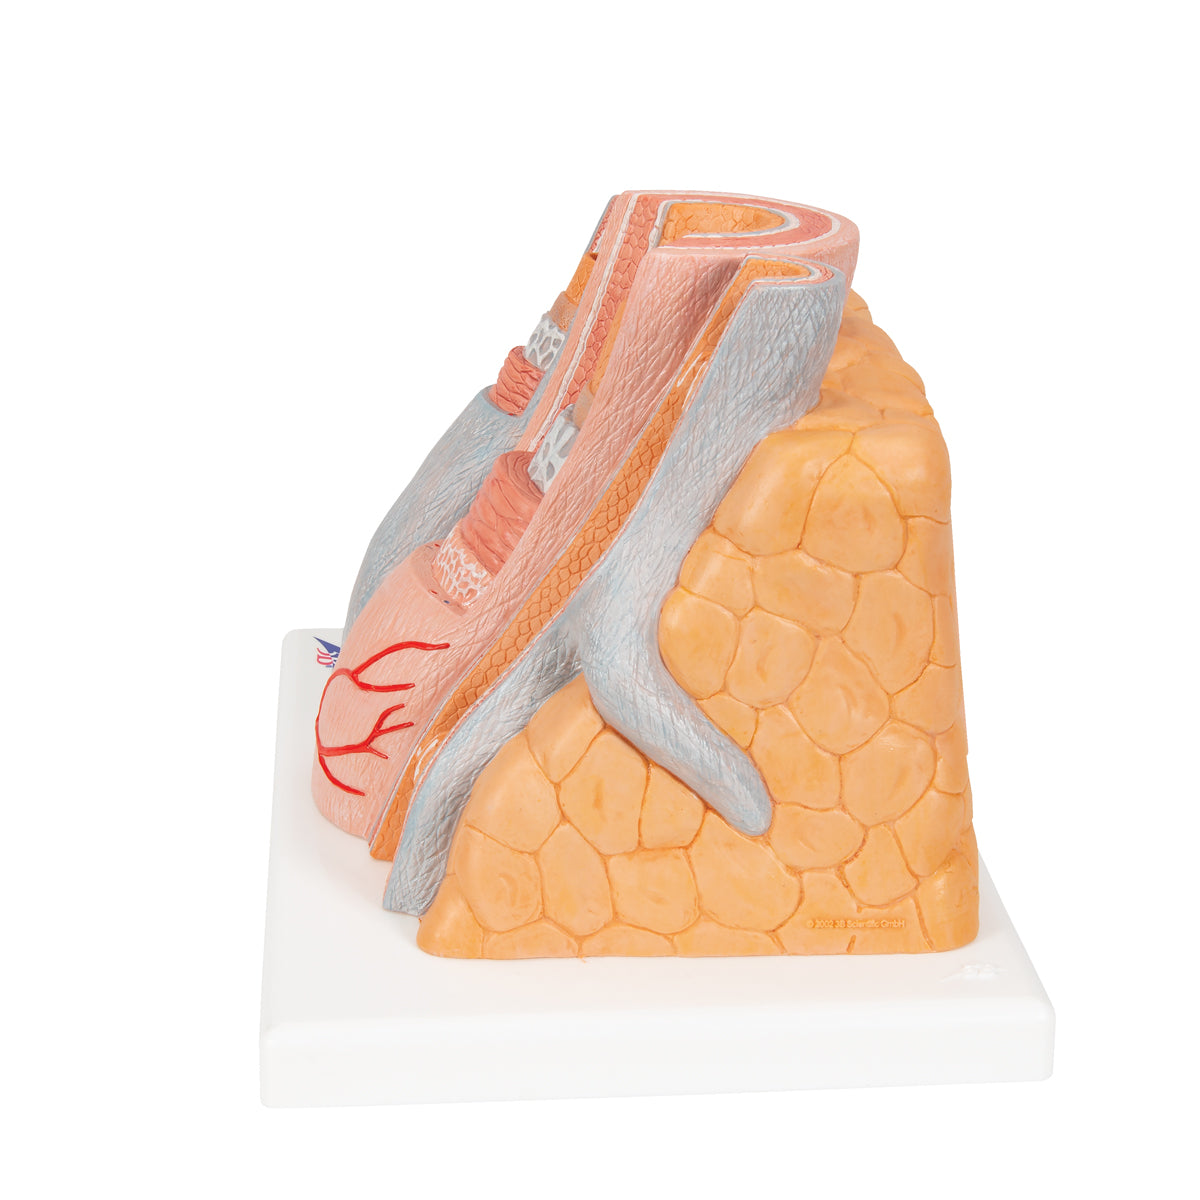 Detailed model of 1 artery and 2 veins which is greatly enlarged